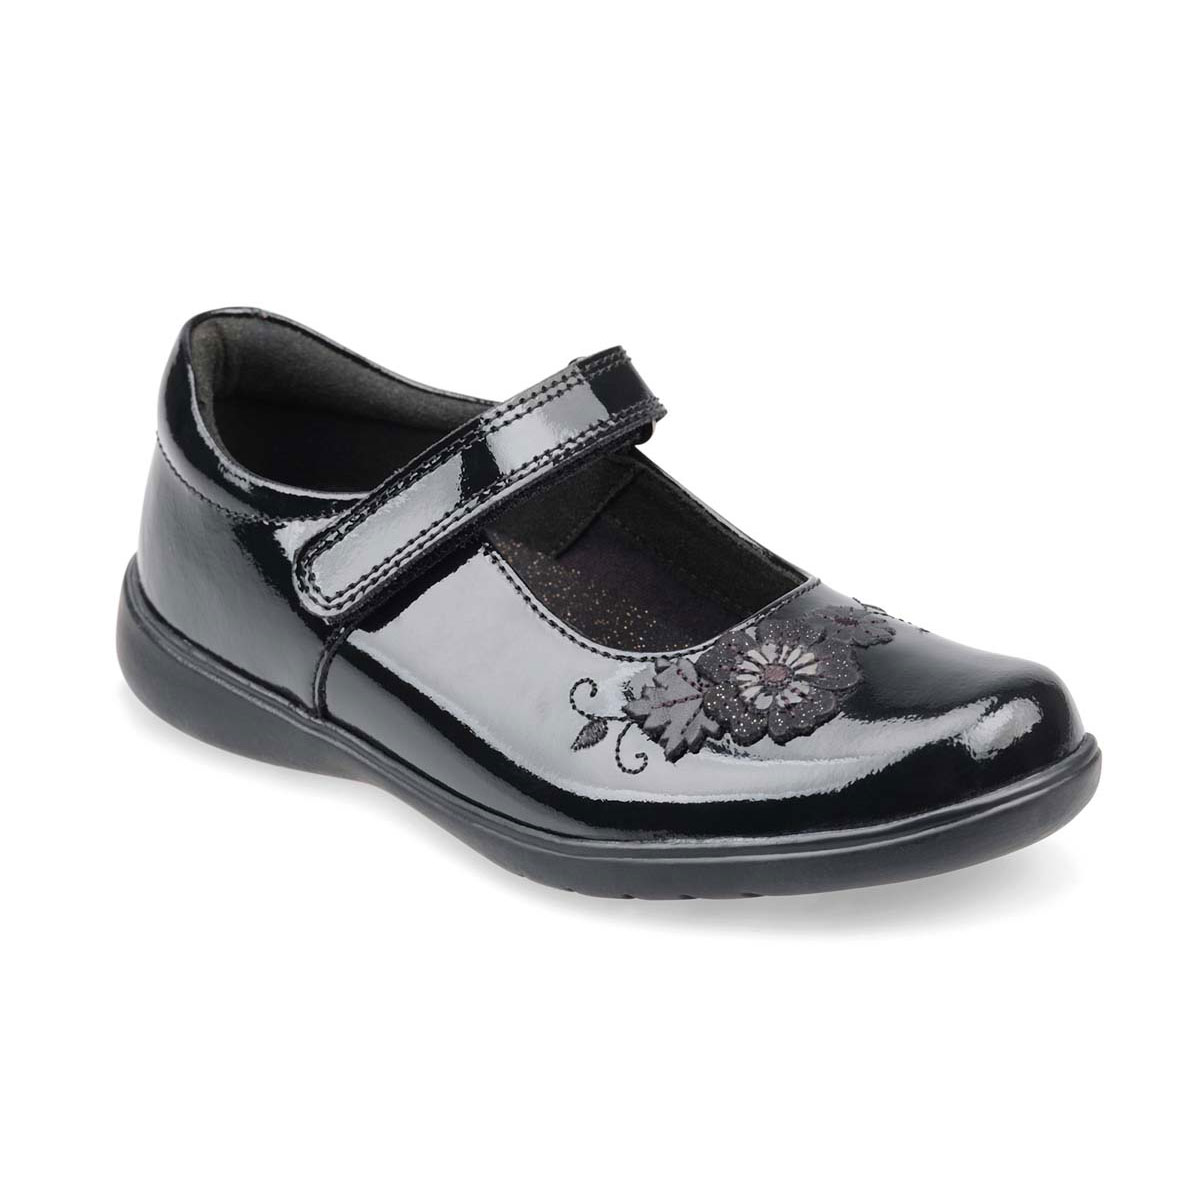 Start Rite - F Wish Mary Jane In Black Patent 2800-3 In Size 13 In Plain Black Patent For School Girls Shoes  In Black Patent For kids